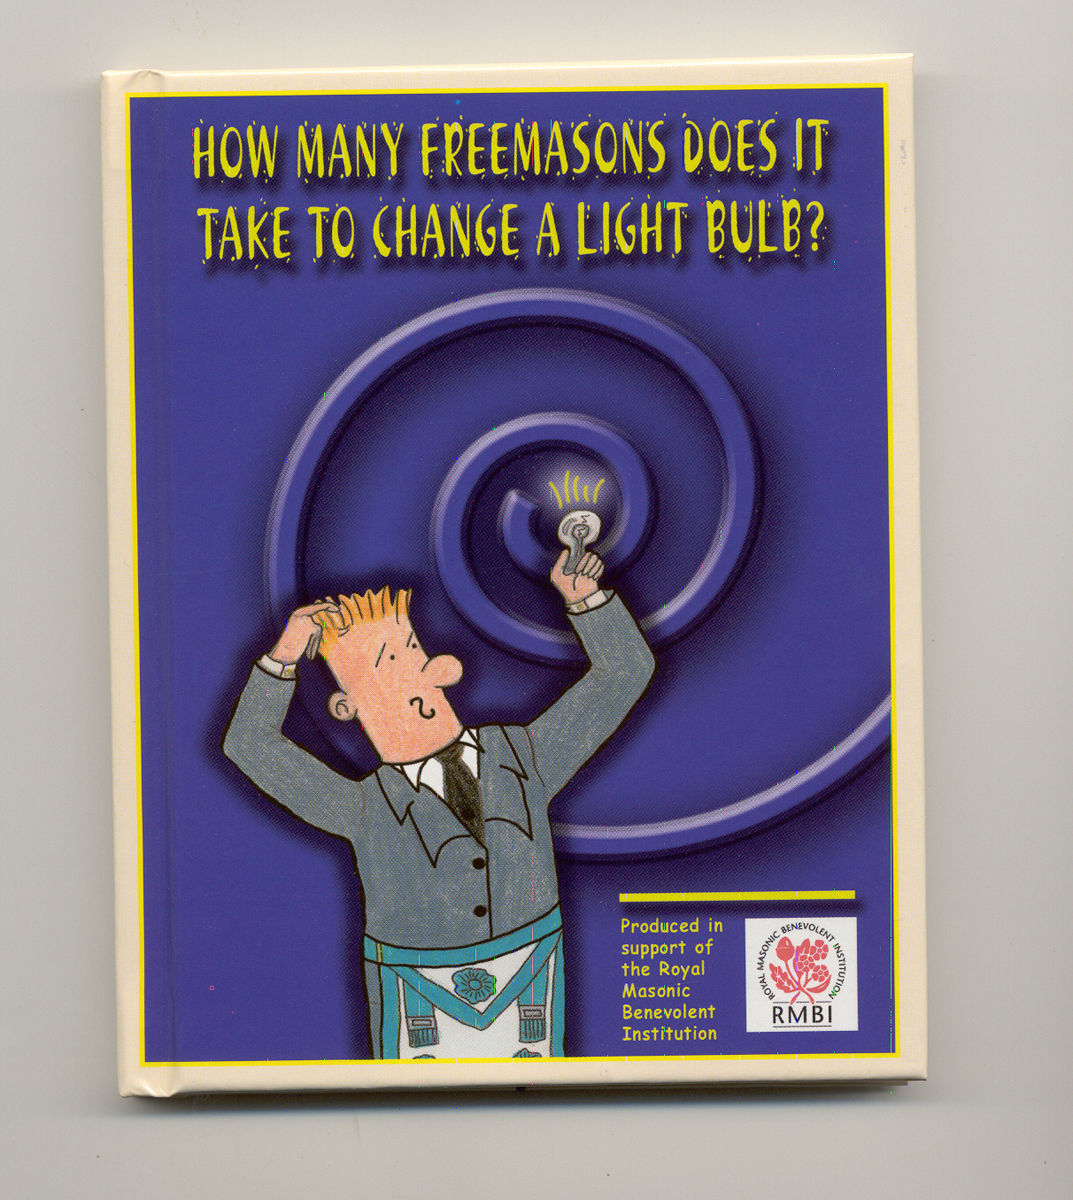 How Many Freemasons Does it Take to Change a Light Bulb?